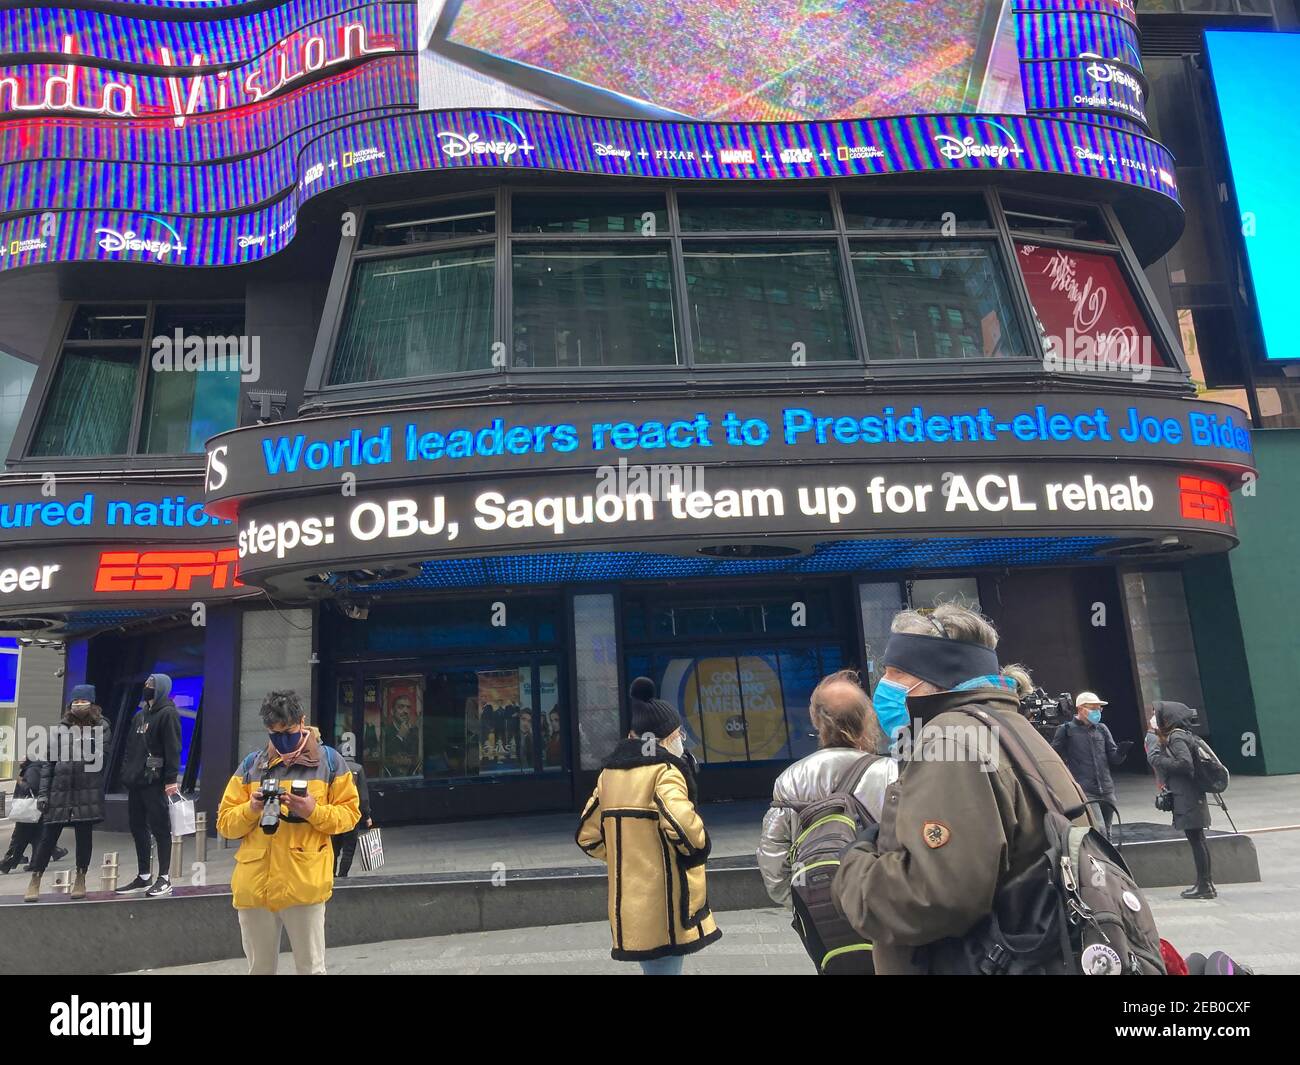 Visitors to Times Square in New York watch the WABC news ticker during the inauguration of 46th President Joseph Biden and Vice-President Kamala Harris on Wednesday, January 20, 2021. (© Frances M. Roberts) Stock Photo